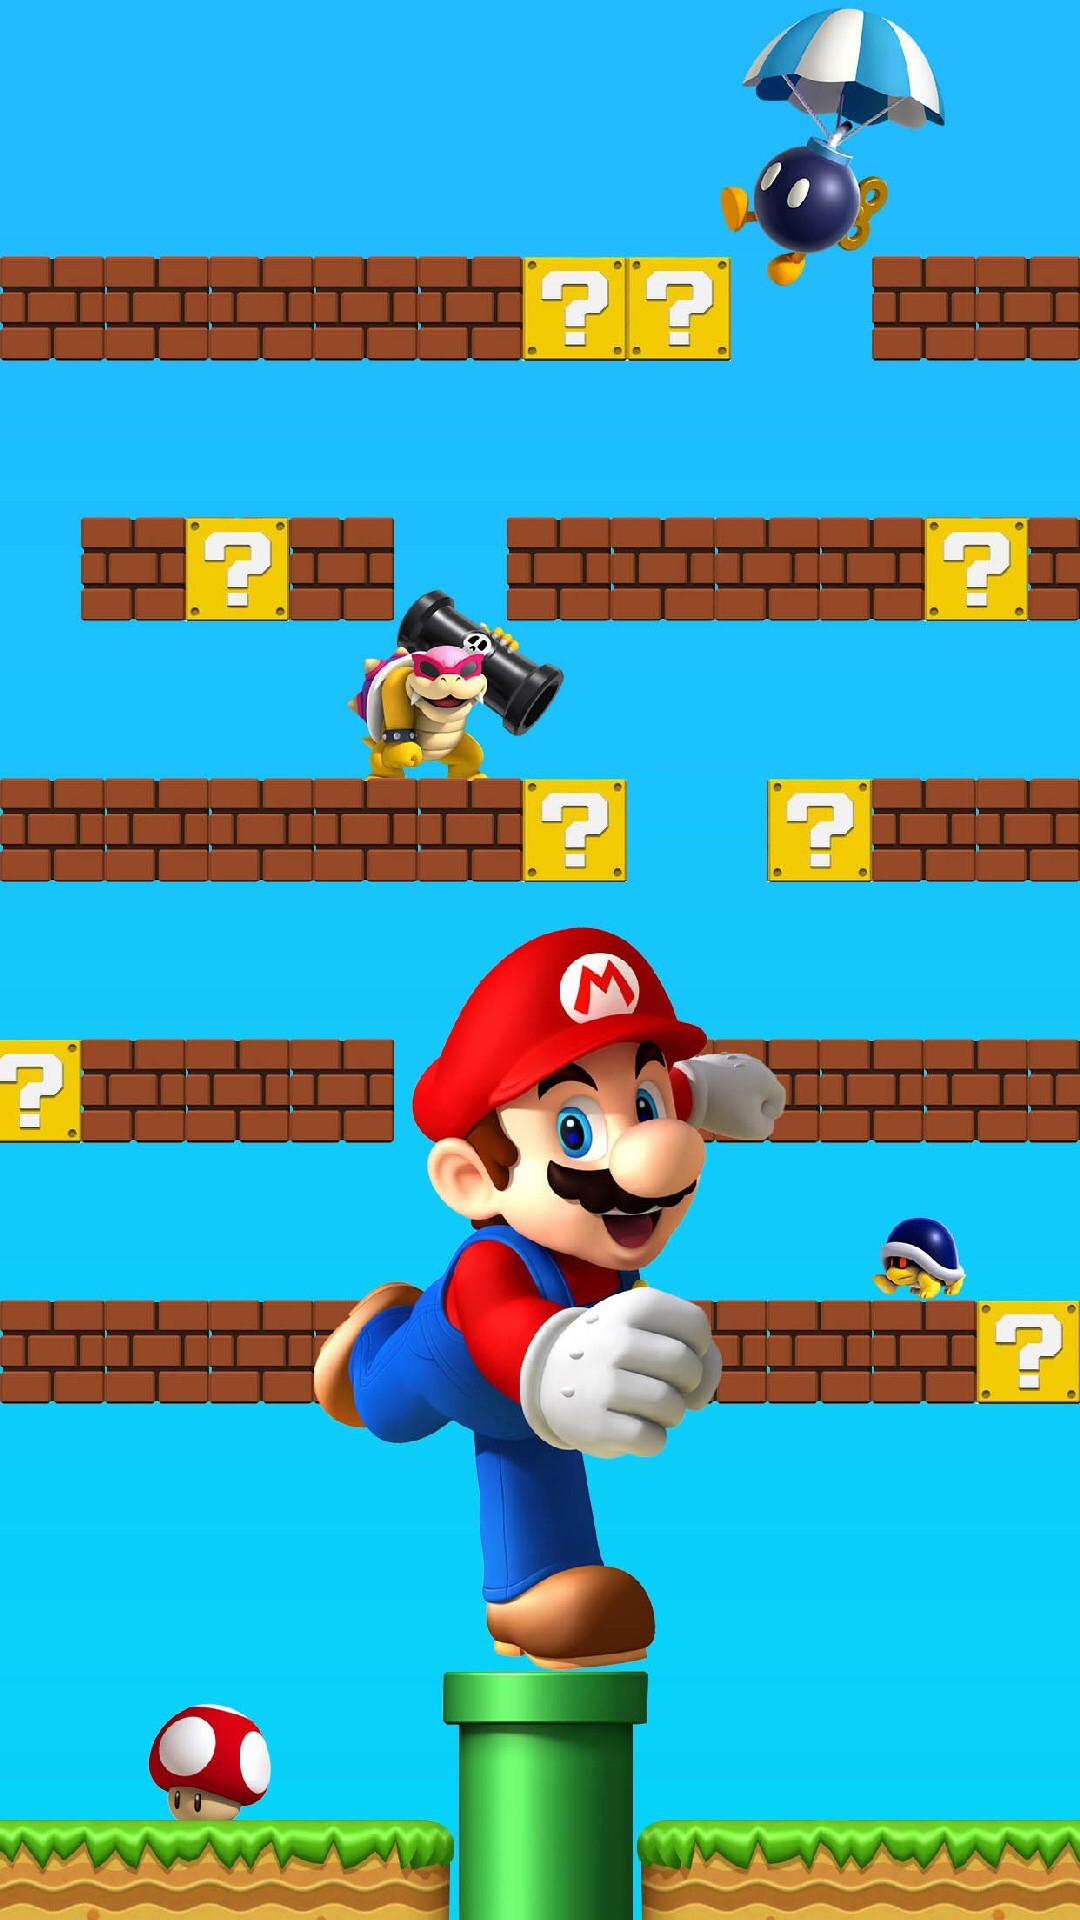 1080x1920 Shelves Super Mario Colorful Awesome Ð¡omputer Graphics